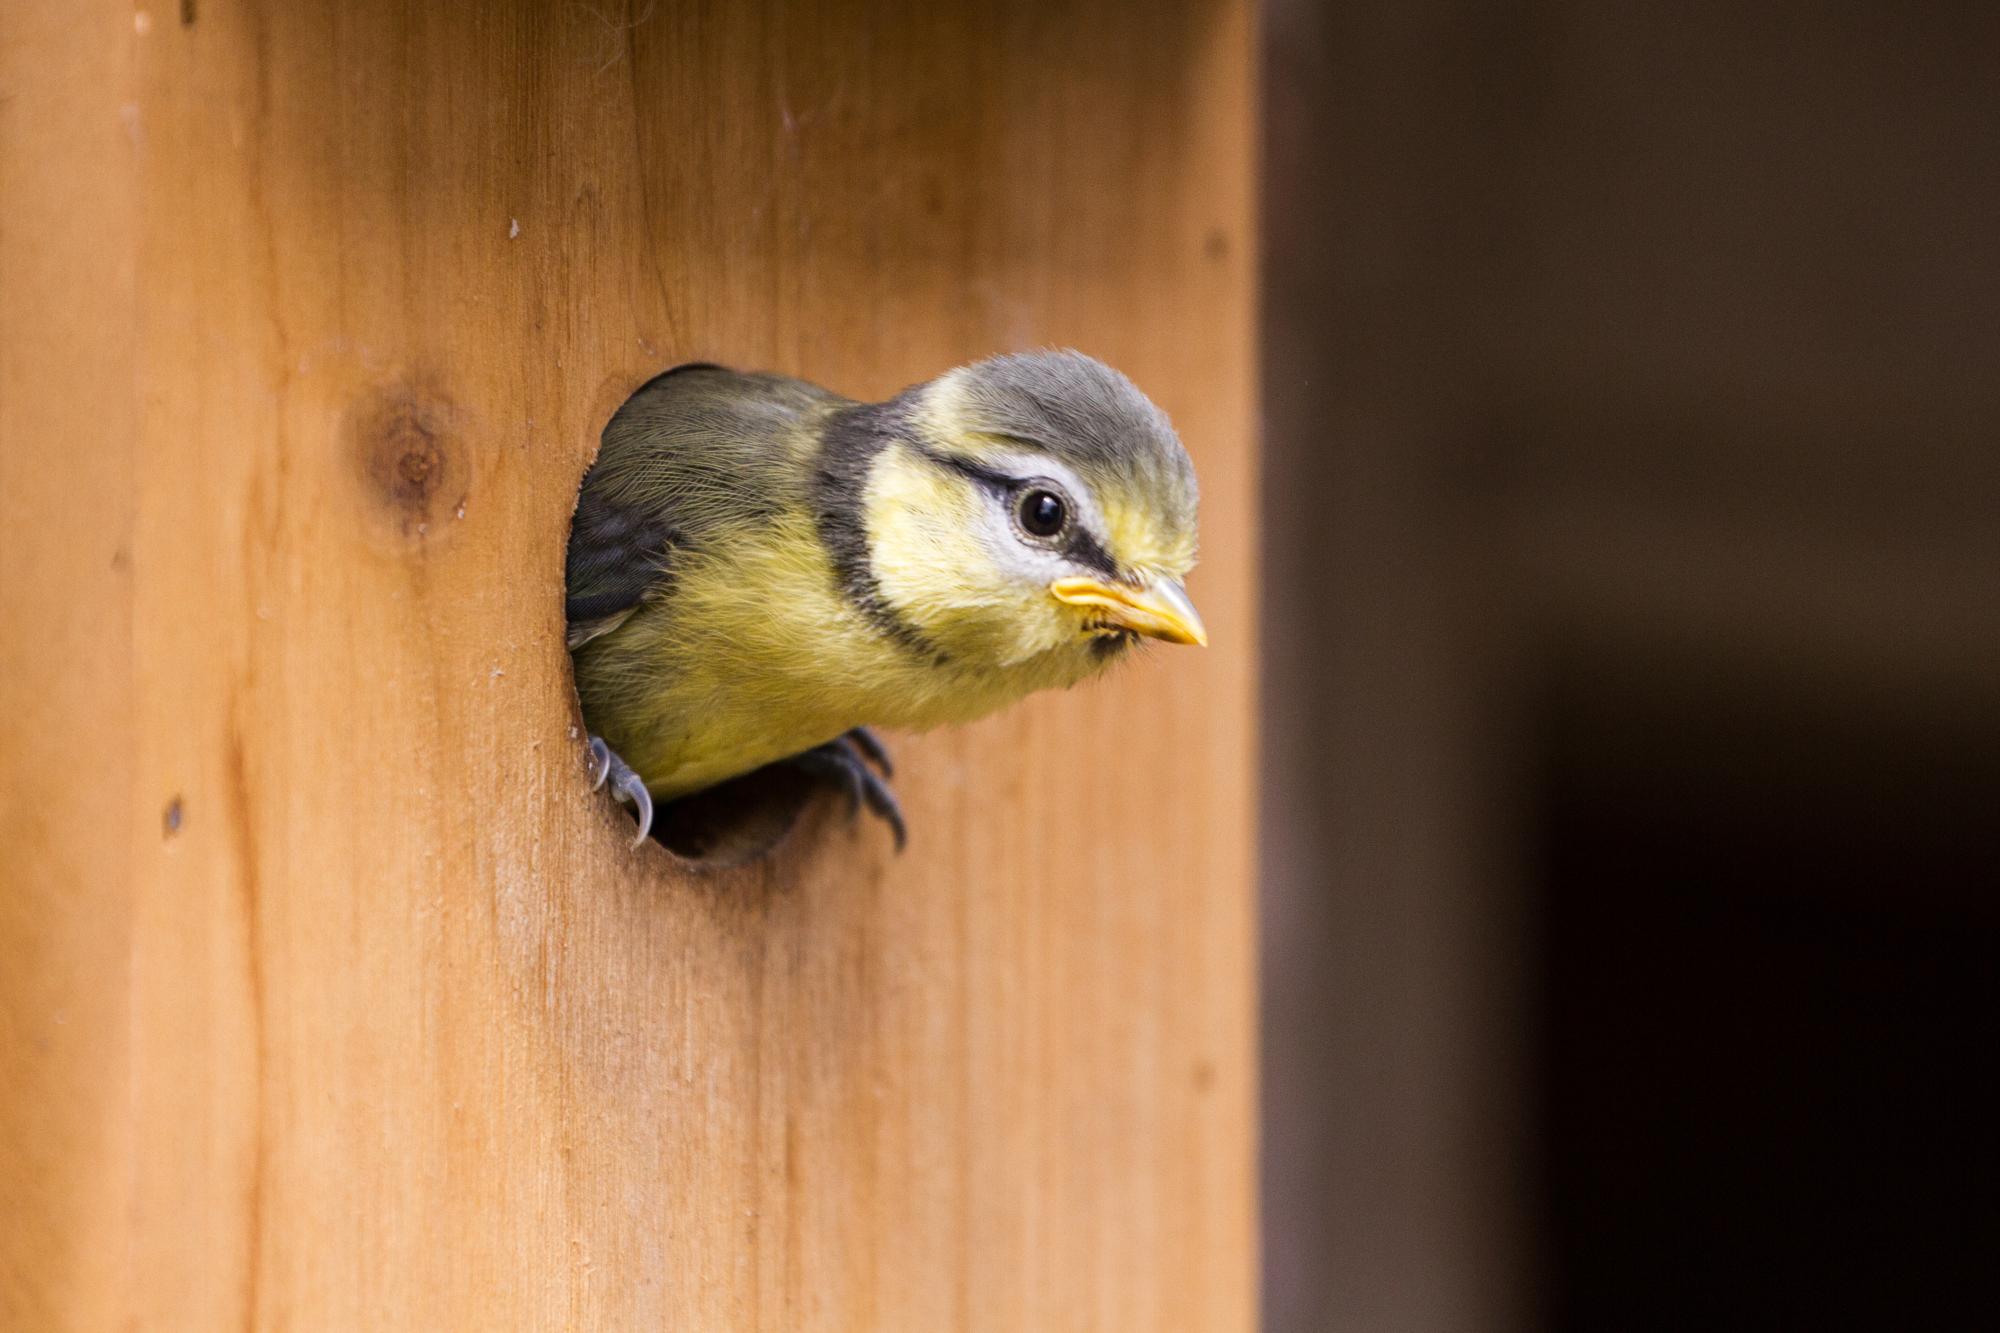 blue tit chick fledging from nest box